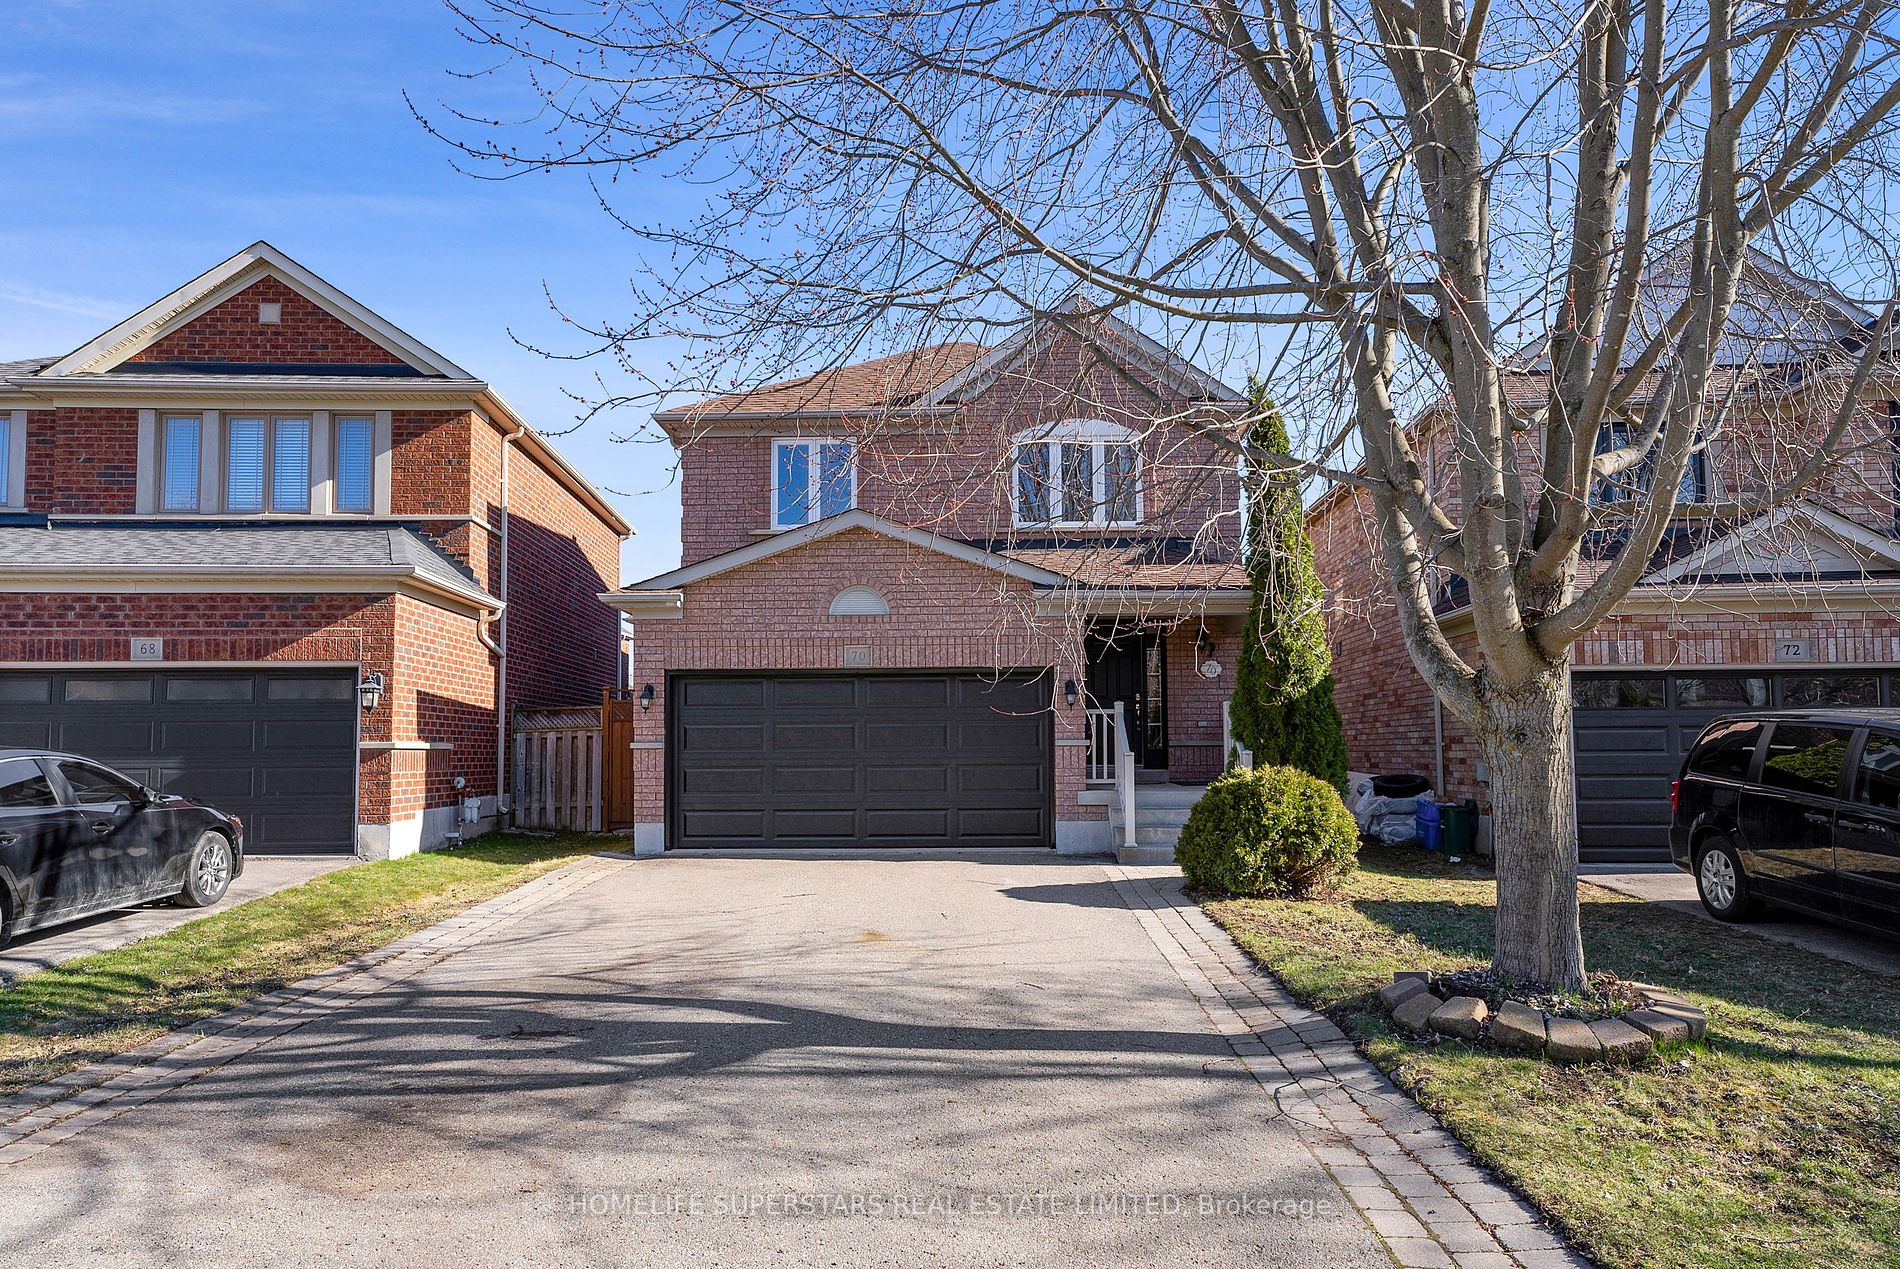 Detached house for sale at 70 Shoniker Dr Newmarket Ontario